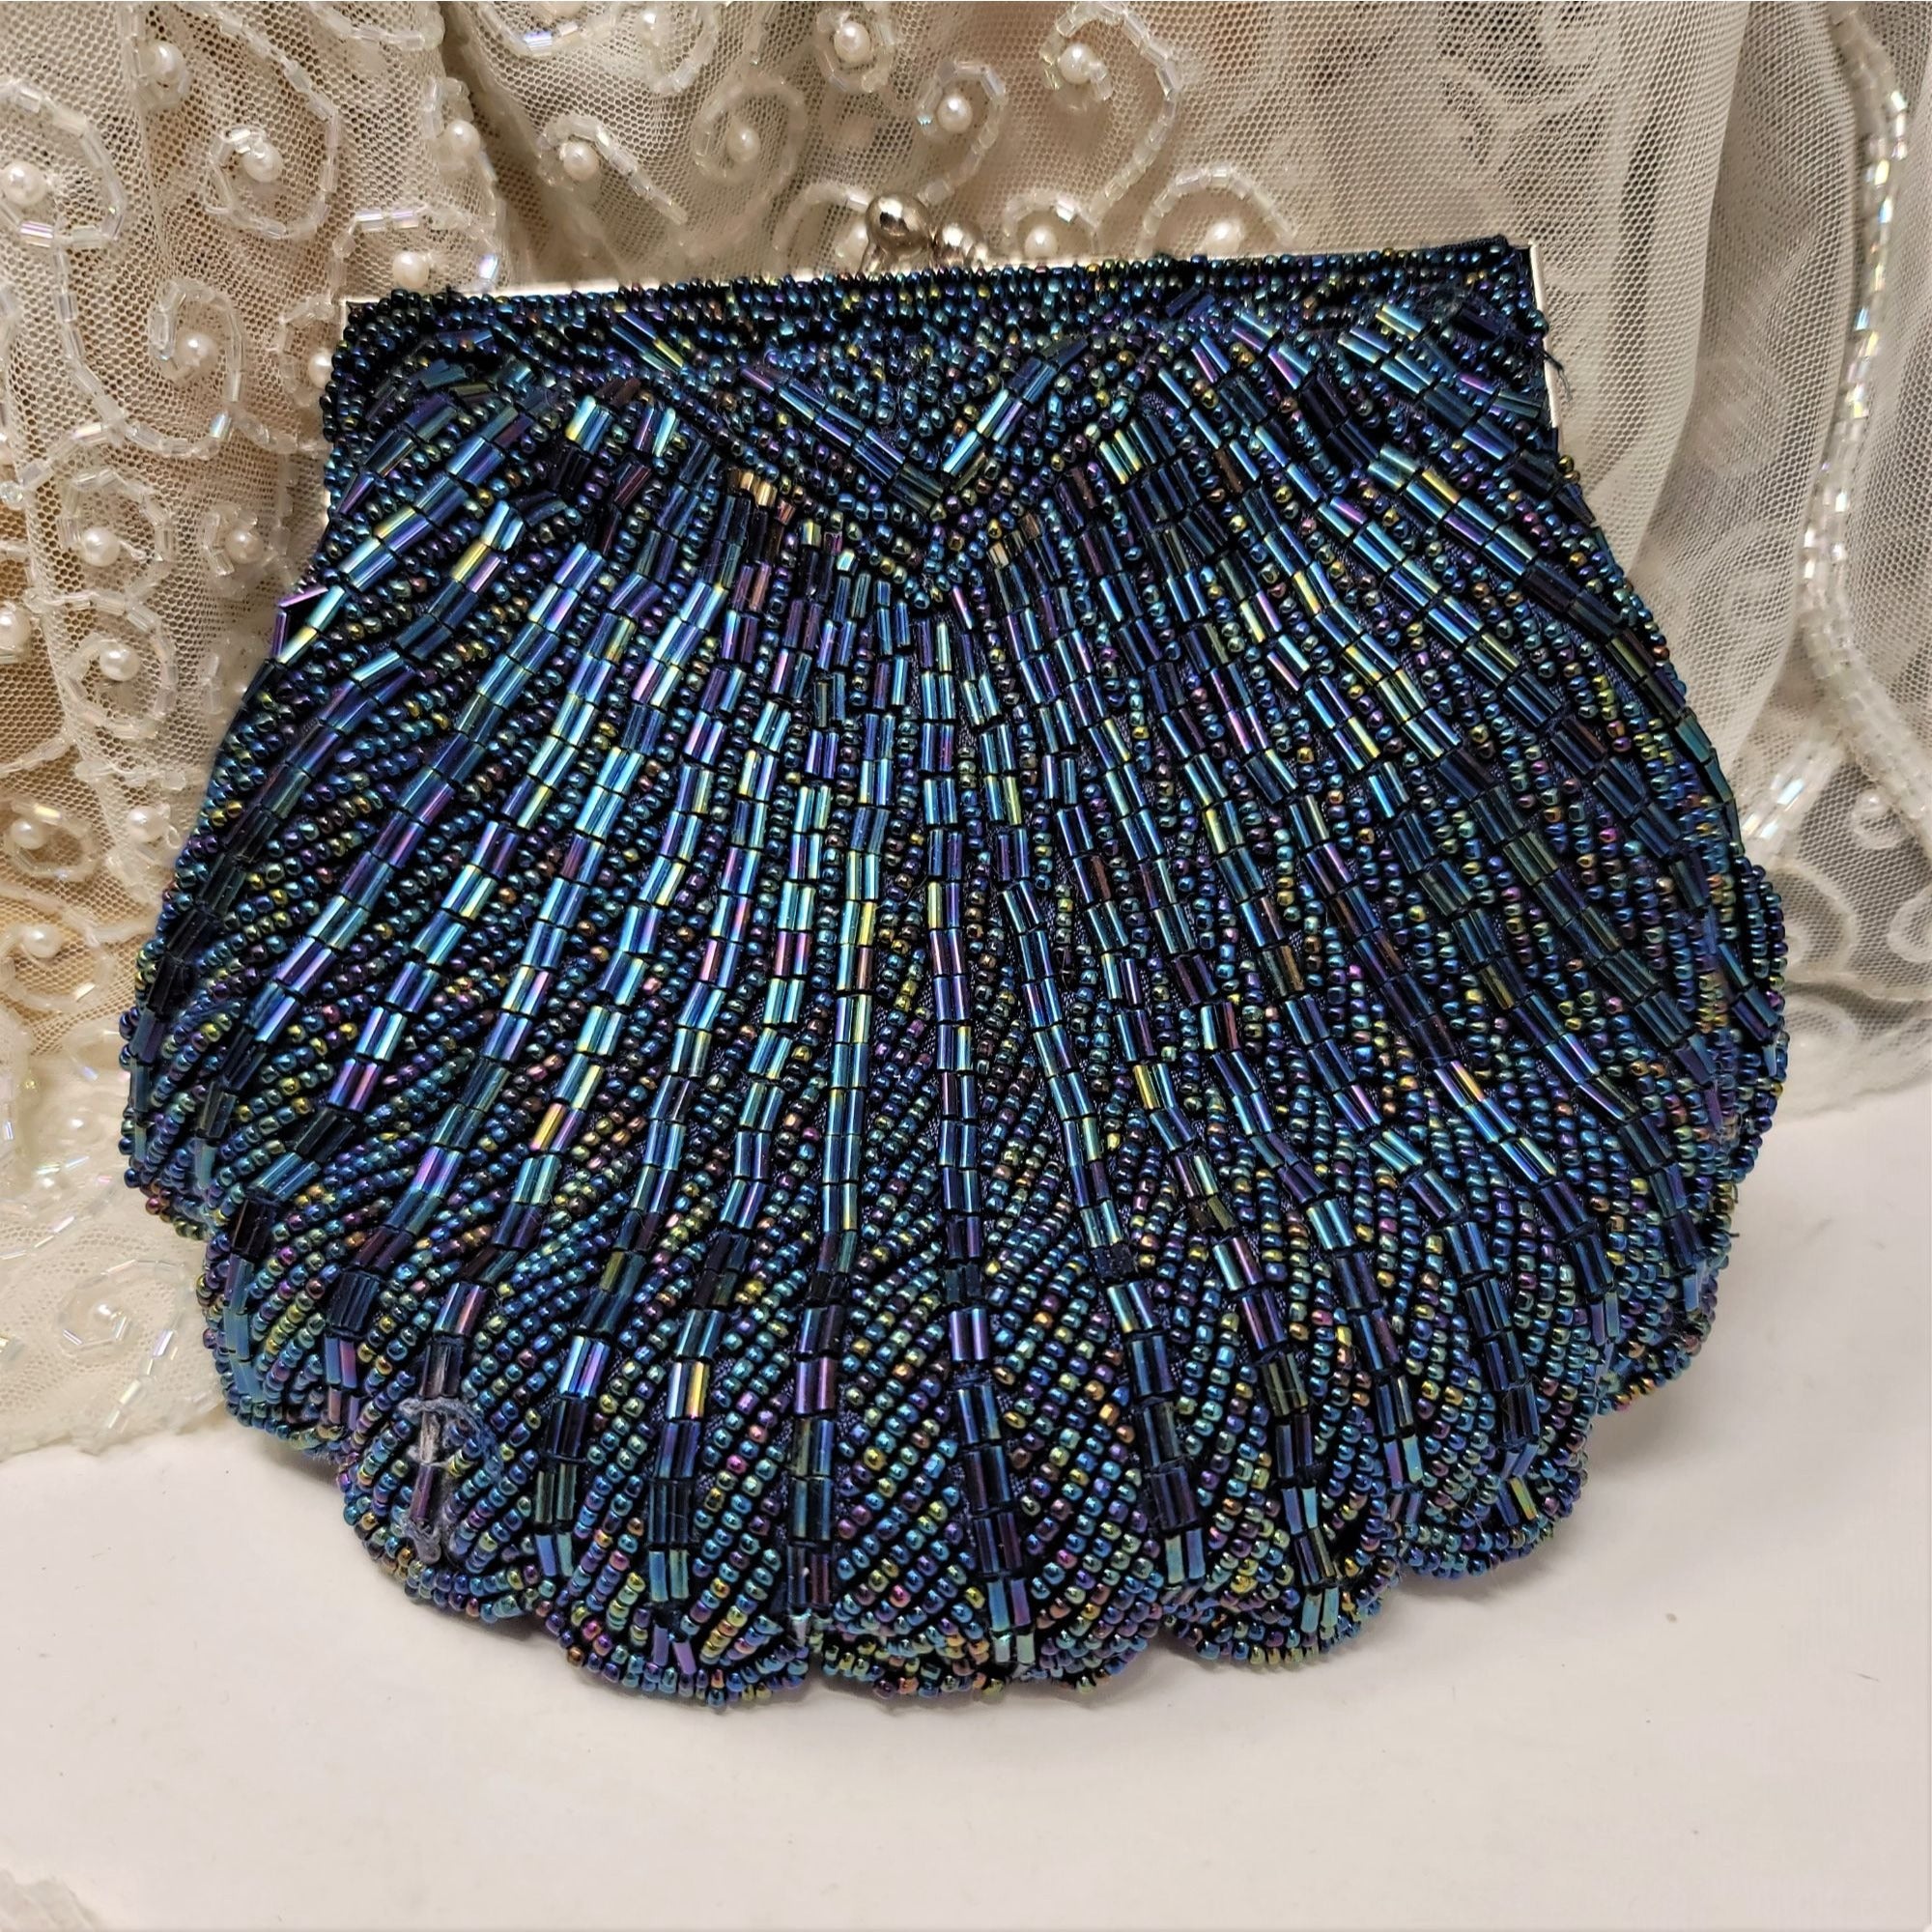 Vintage Clam Shell Beaded Bag by Carla Marchi Peacock Blue